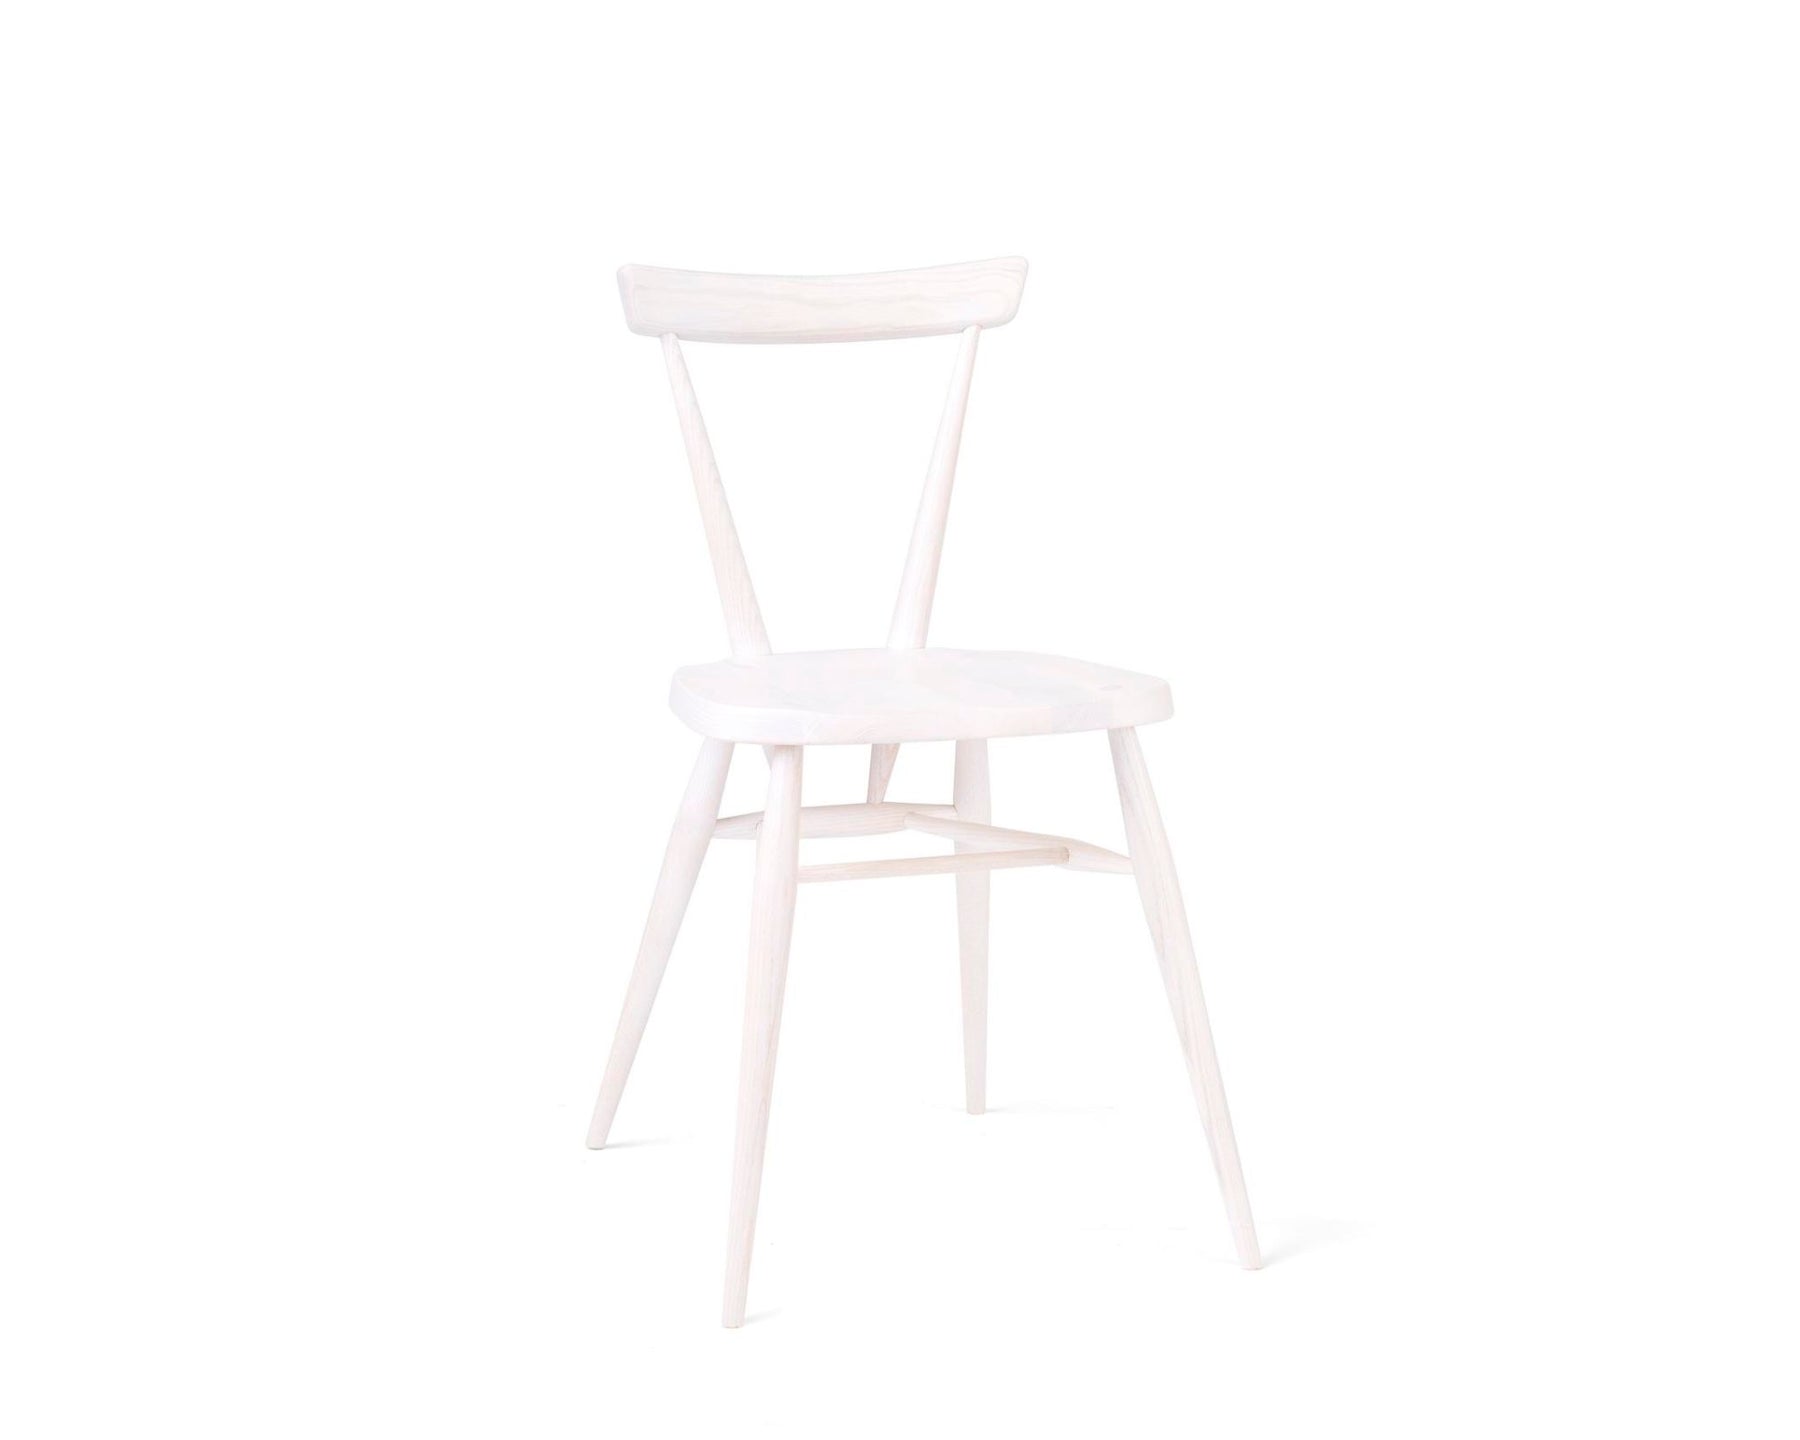 Small Wood Dining Chair | DSHOP